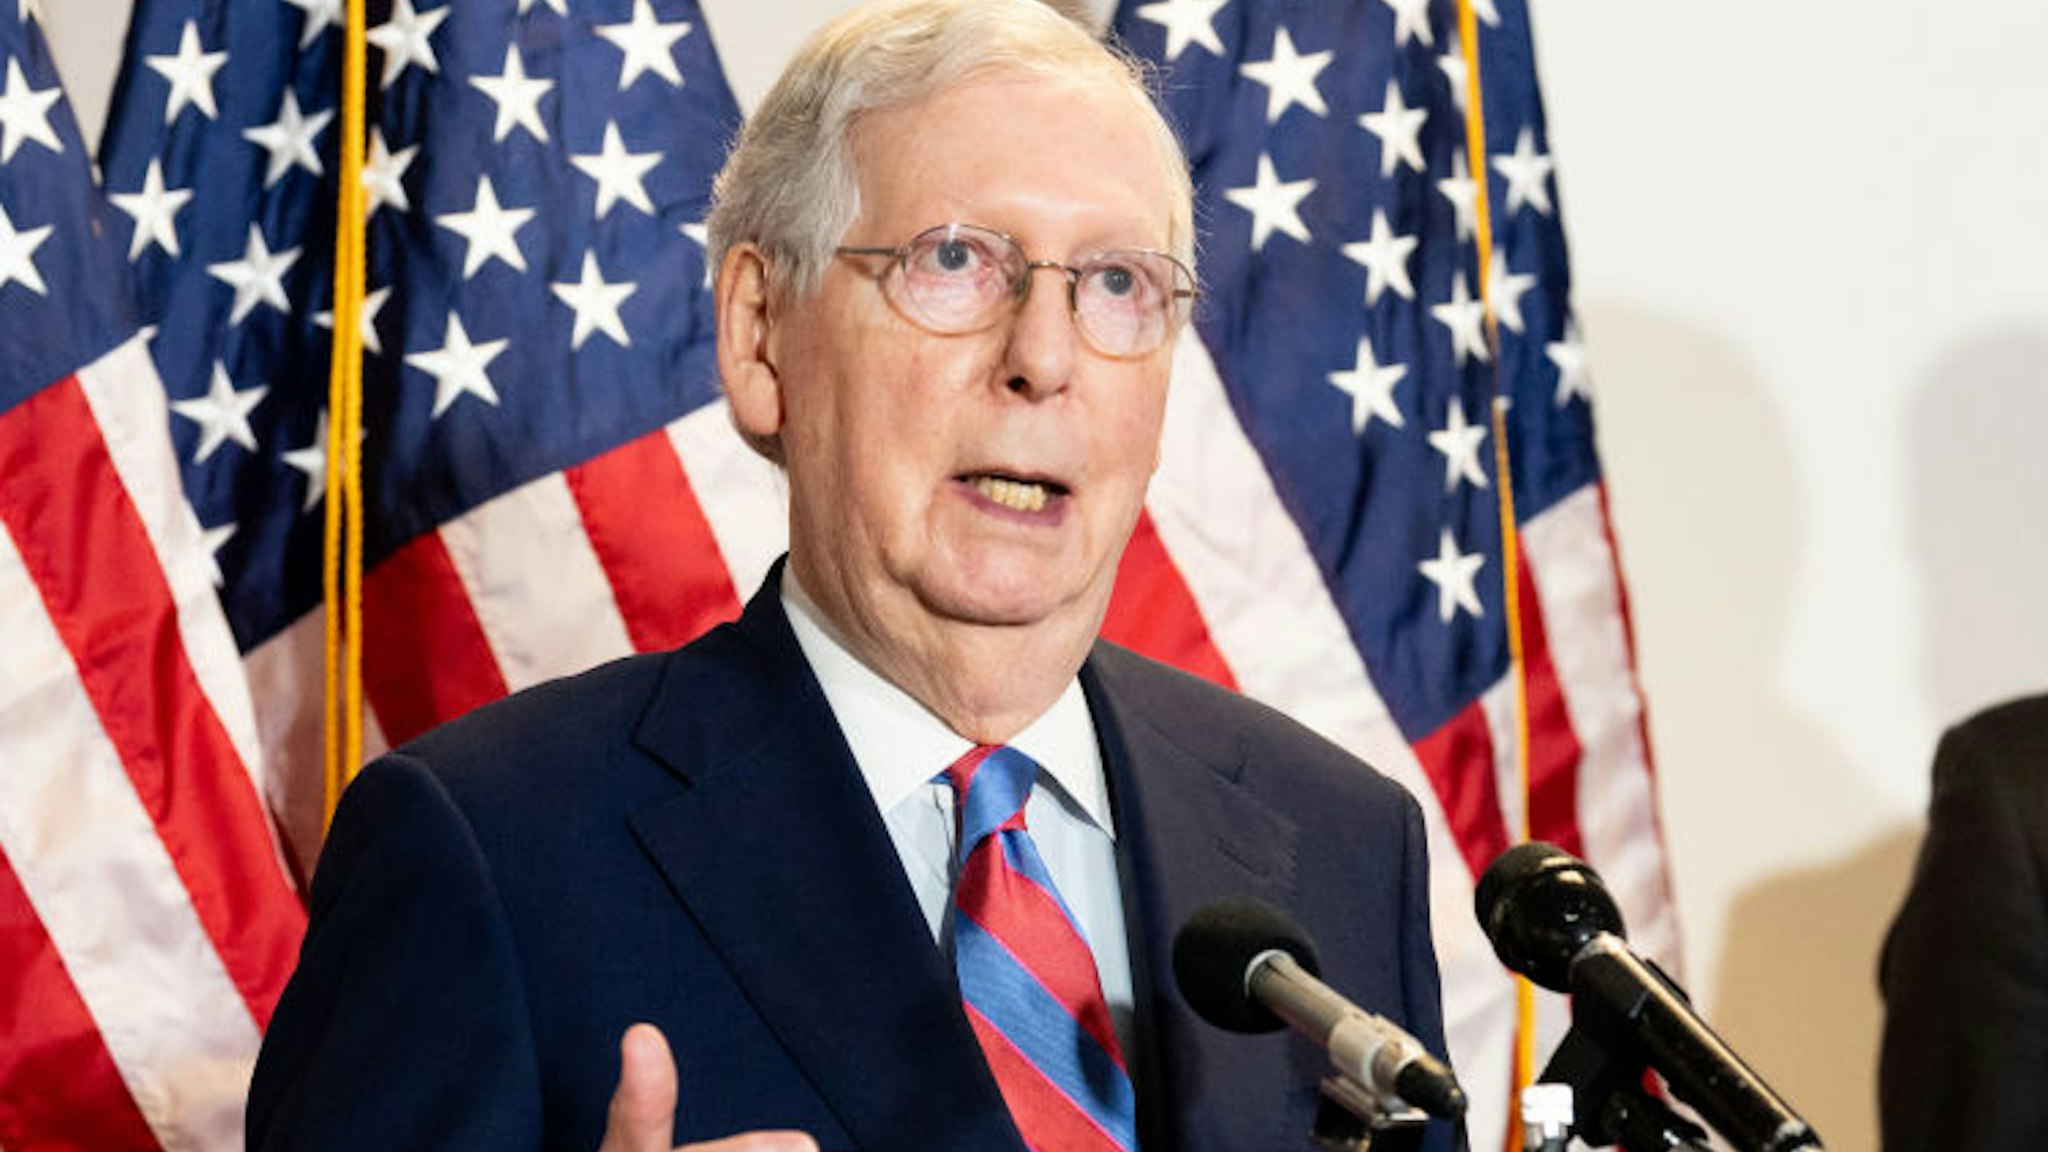 WASHINGTON, UNITED STATES - MAY 12, 2020: U.S. Senator Mitch McConnell (R-KY) speaks during the Republican Senate Caucus Leadership press conference in Washington, DC.